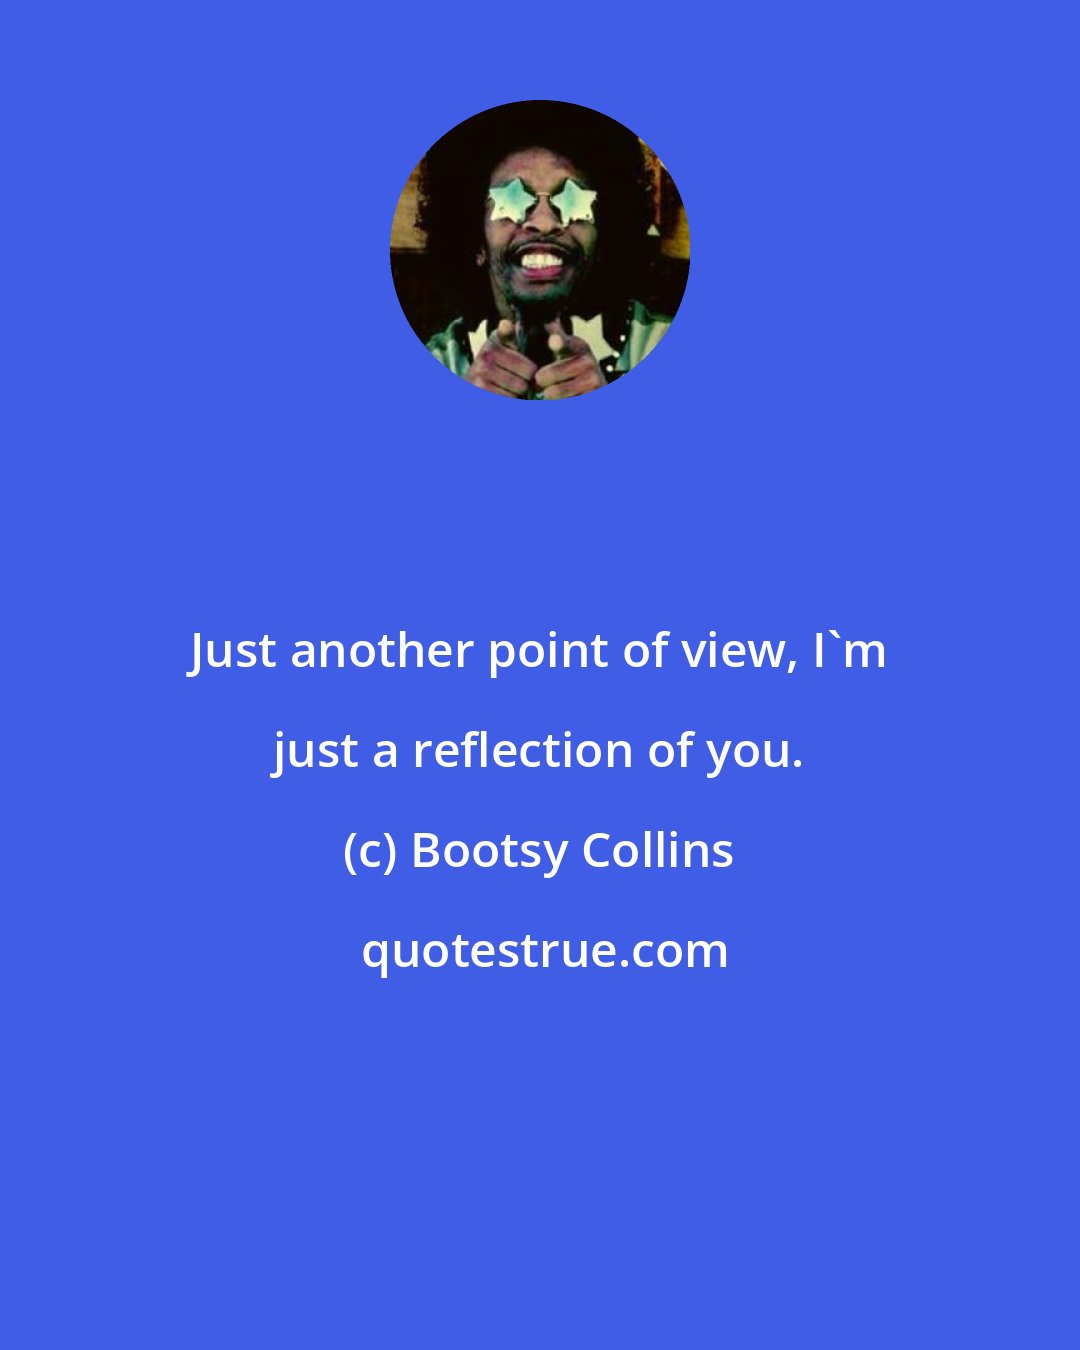 Bootsy Collins: Just another point of view, I'm just a reflection of you.